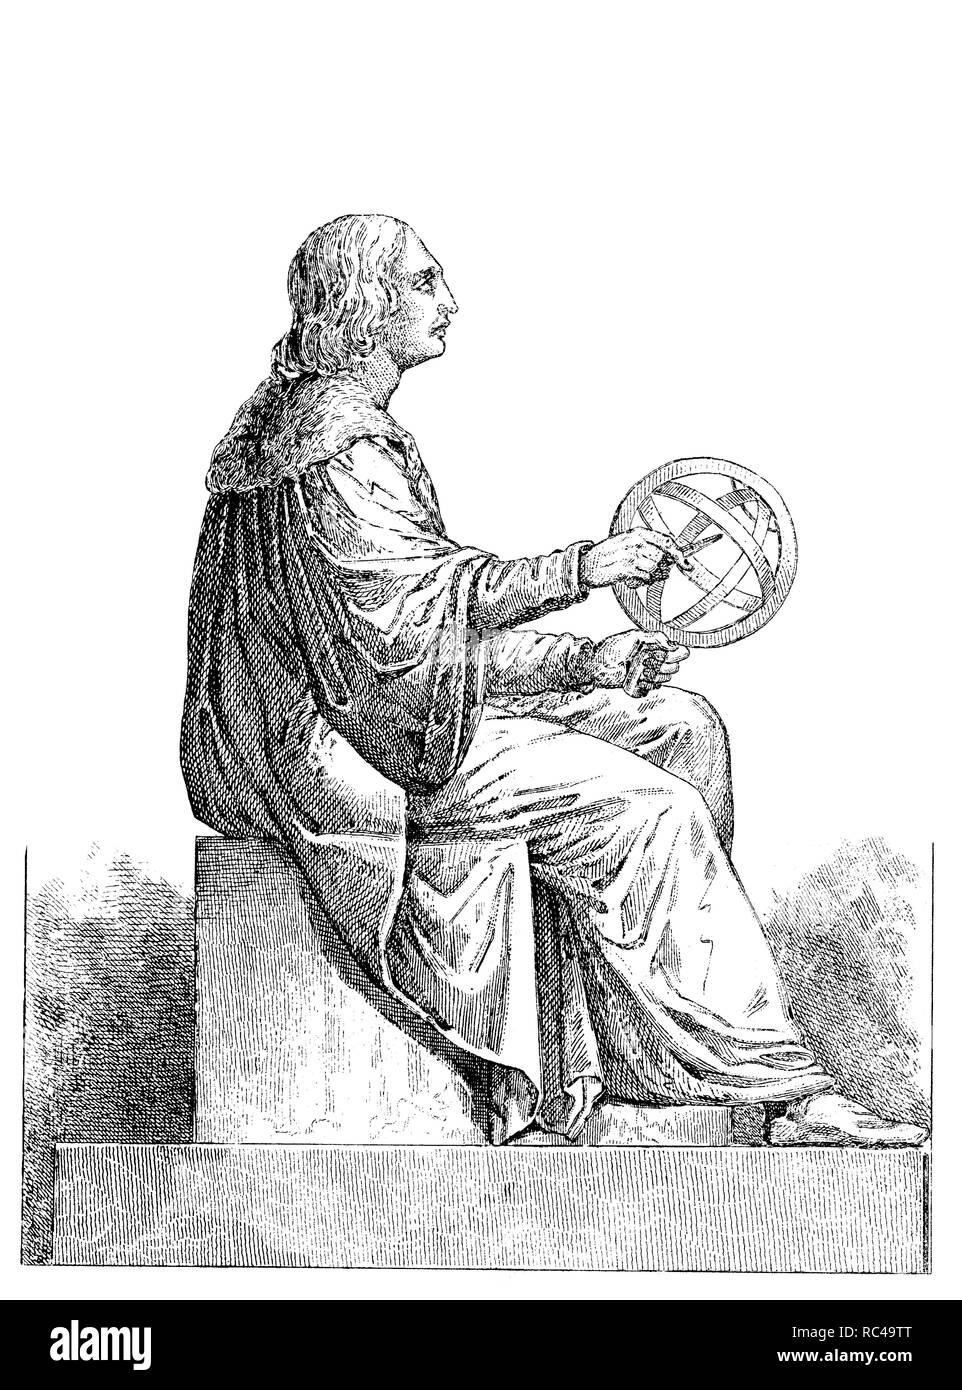 Poland. Sculpture of Nicolaus Copernicus (1473-1543) in Warsaw. Polish astronomer of the Renaissance who formulated the heliocentric theory of the solar system, holding an astrolabe. Etching 1850. Stock Photo